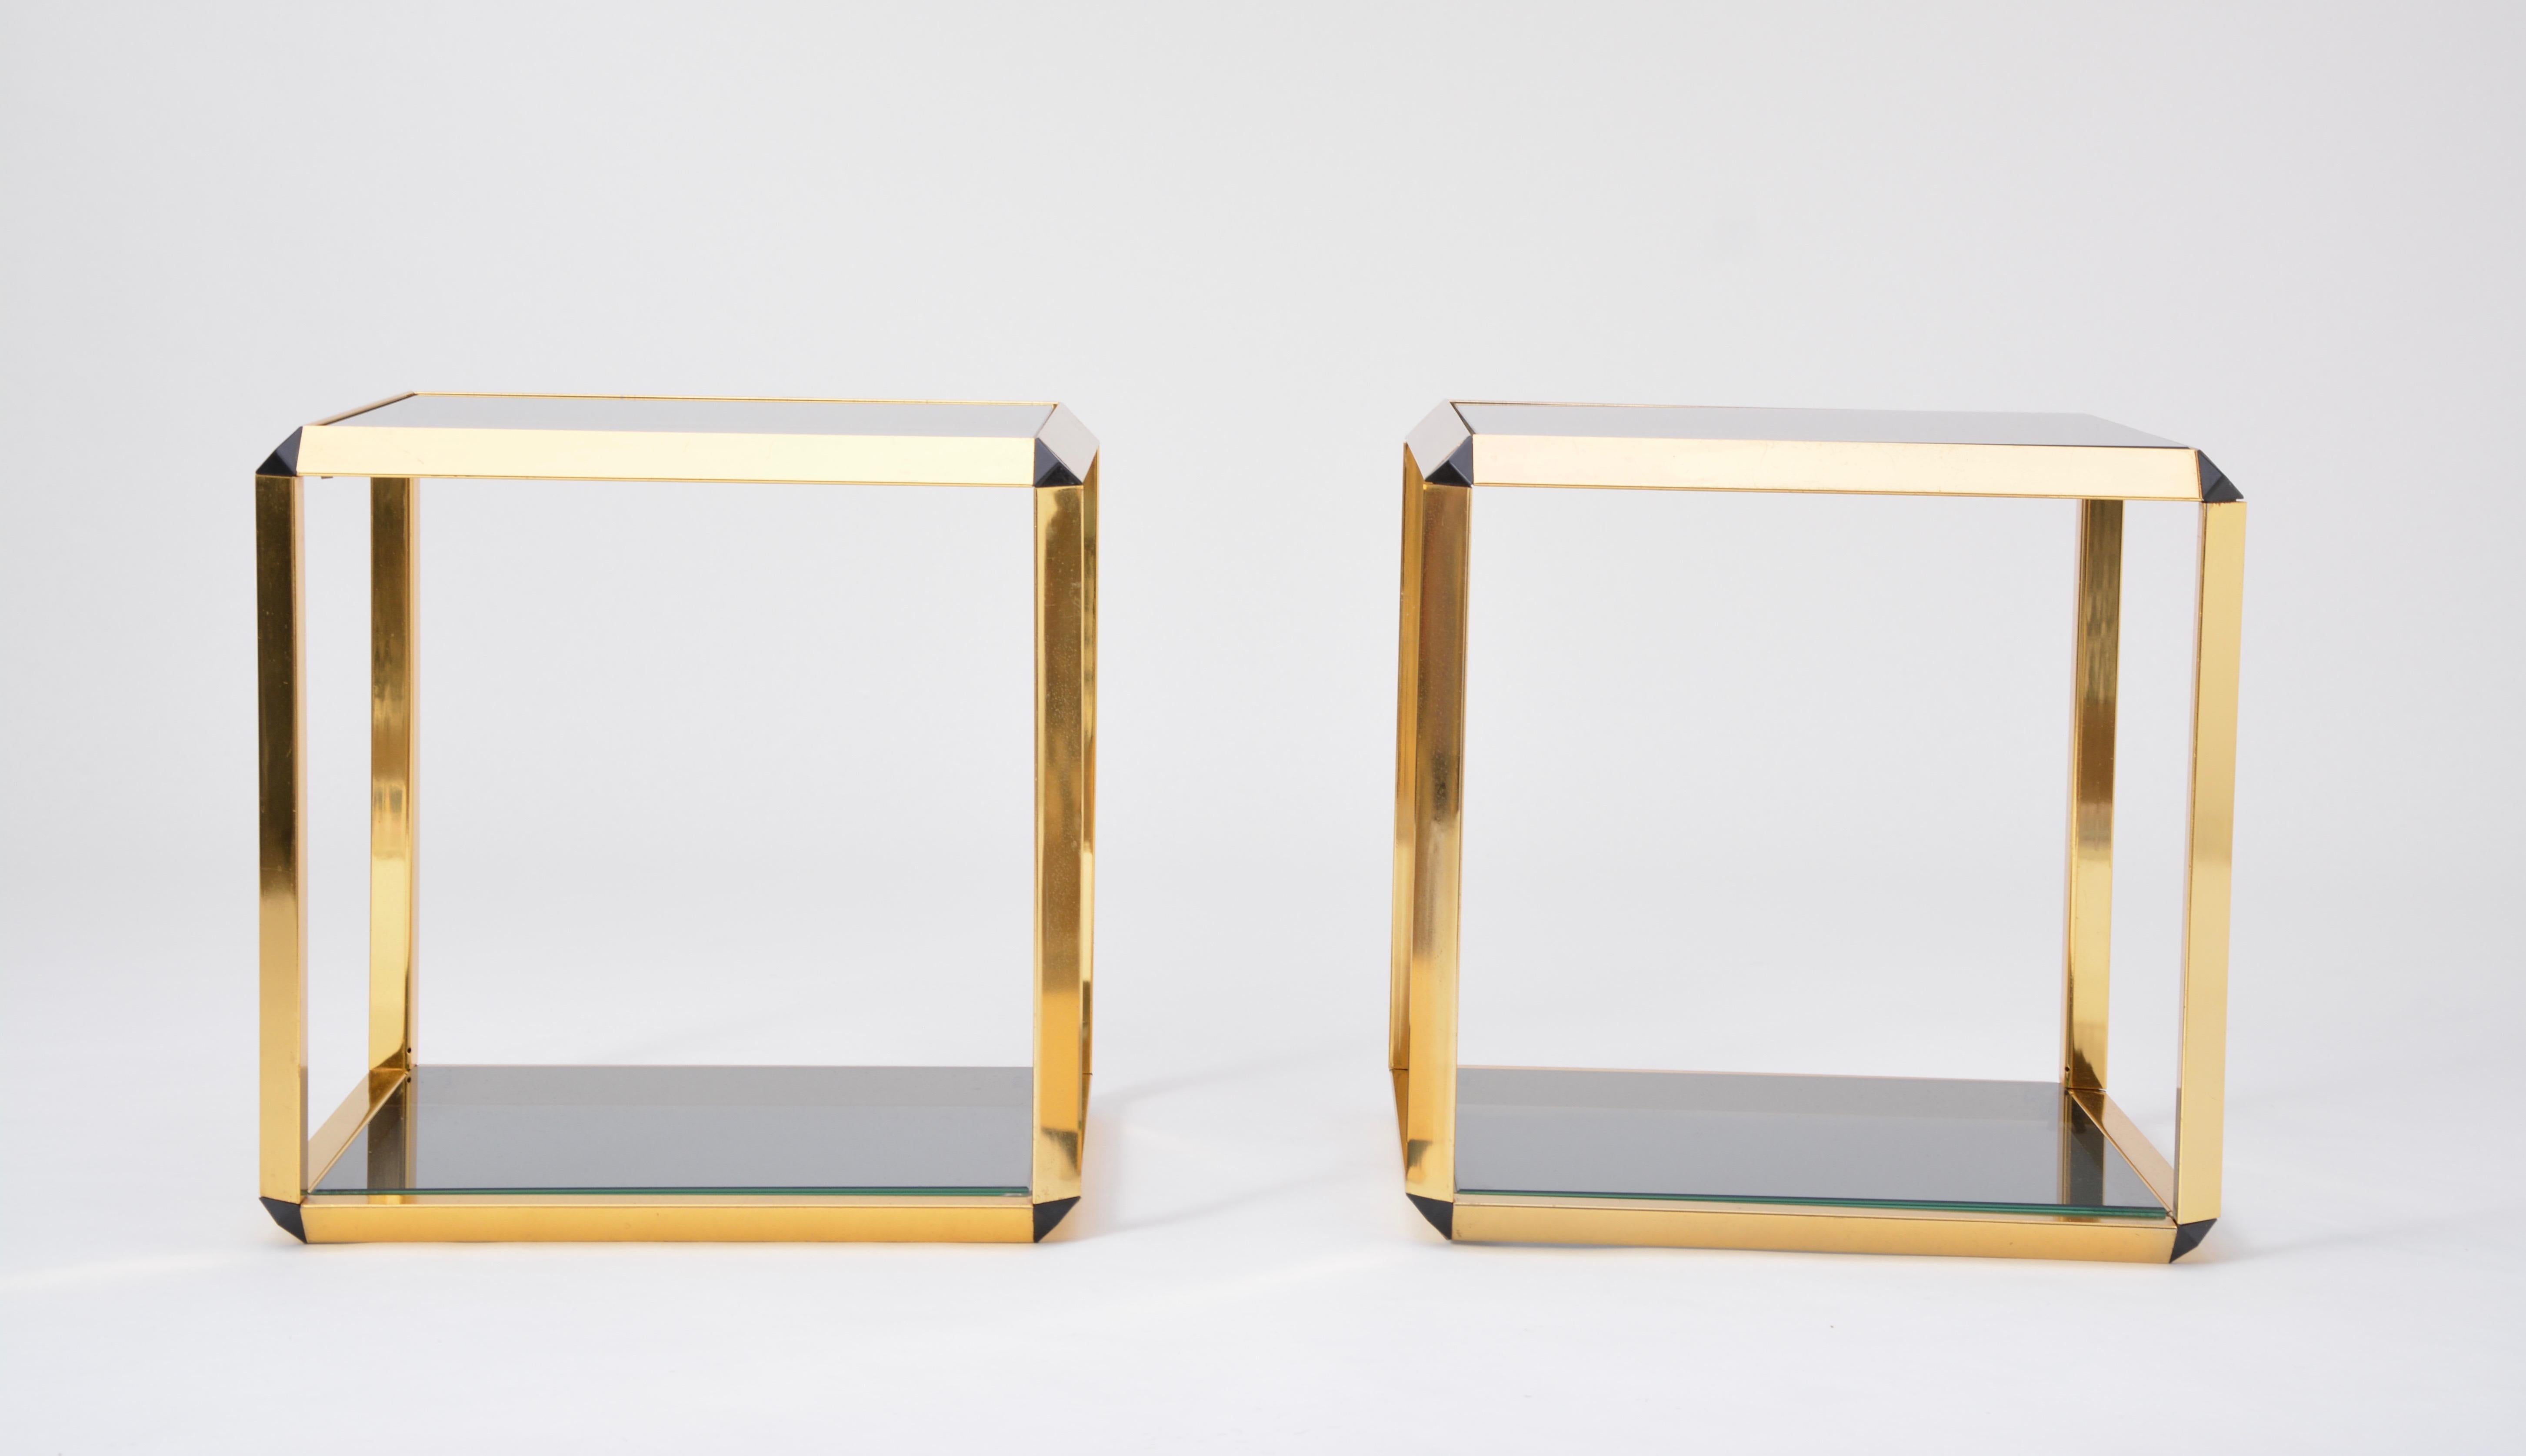 Gilt Pair of Mid-Century Modern Italian Gold-Rimmed Metal and Glass Side Tables